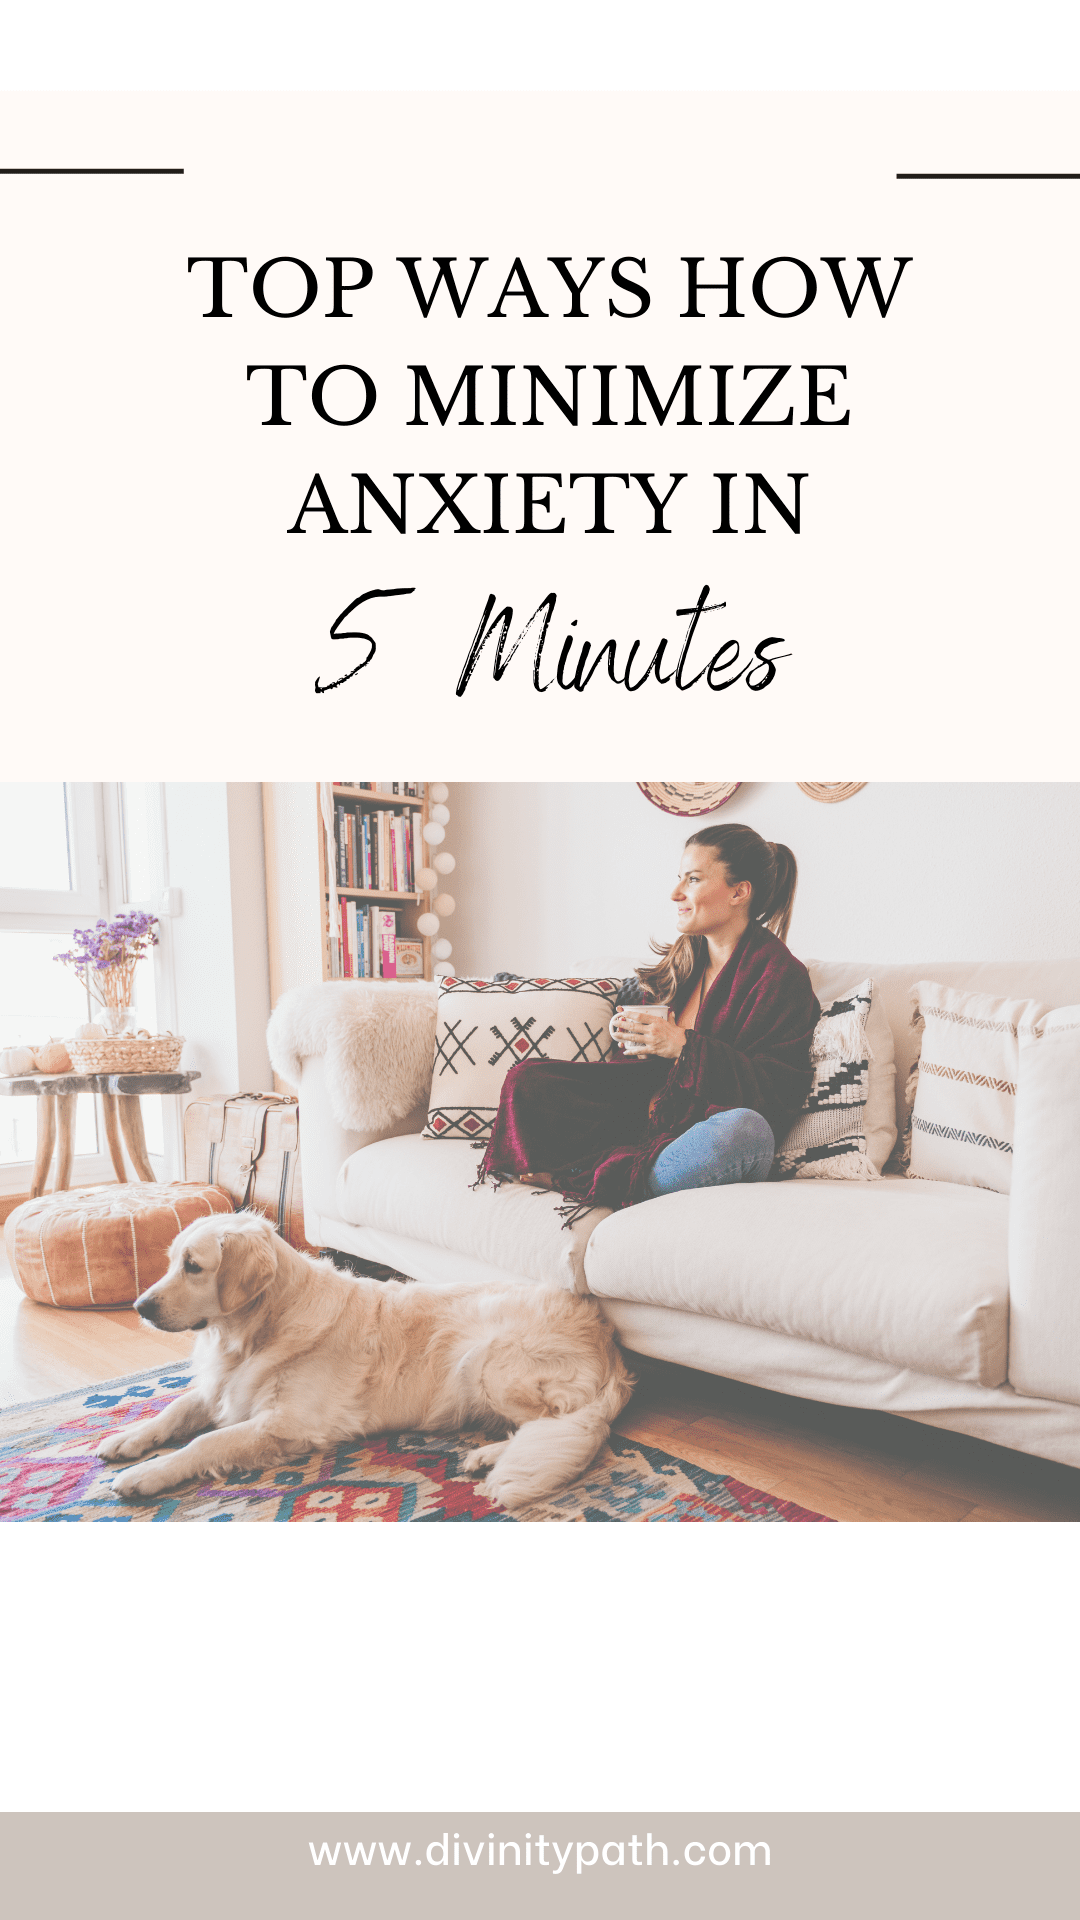 Top Ways How To Minimize Anxiety In 5 Minutes